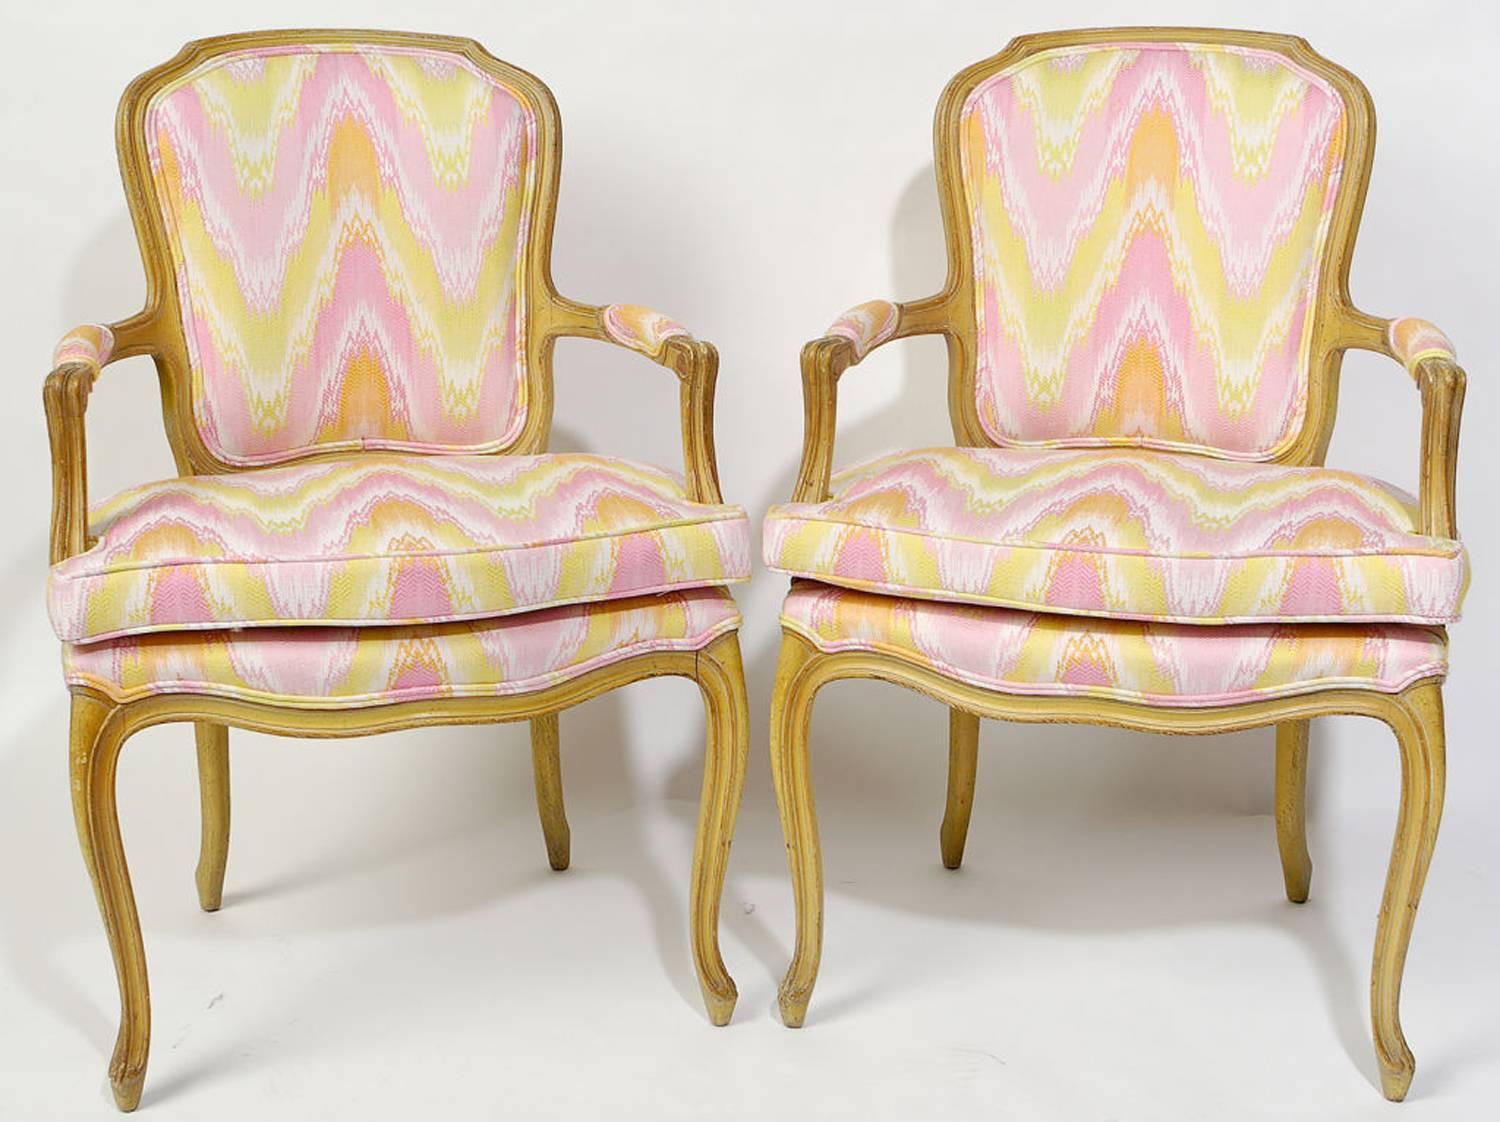 Pair of 1940s Louis XV style open armchairs with original antique glazed and distressed painted finish. Newly upholstered in a vintage pink, yellow, white and apricot flame stitch fabric.